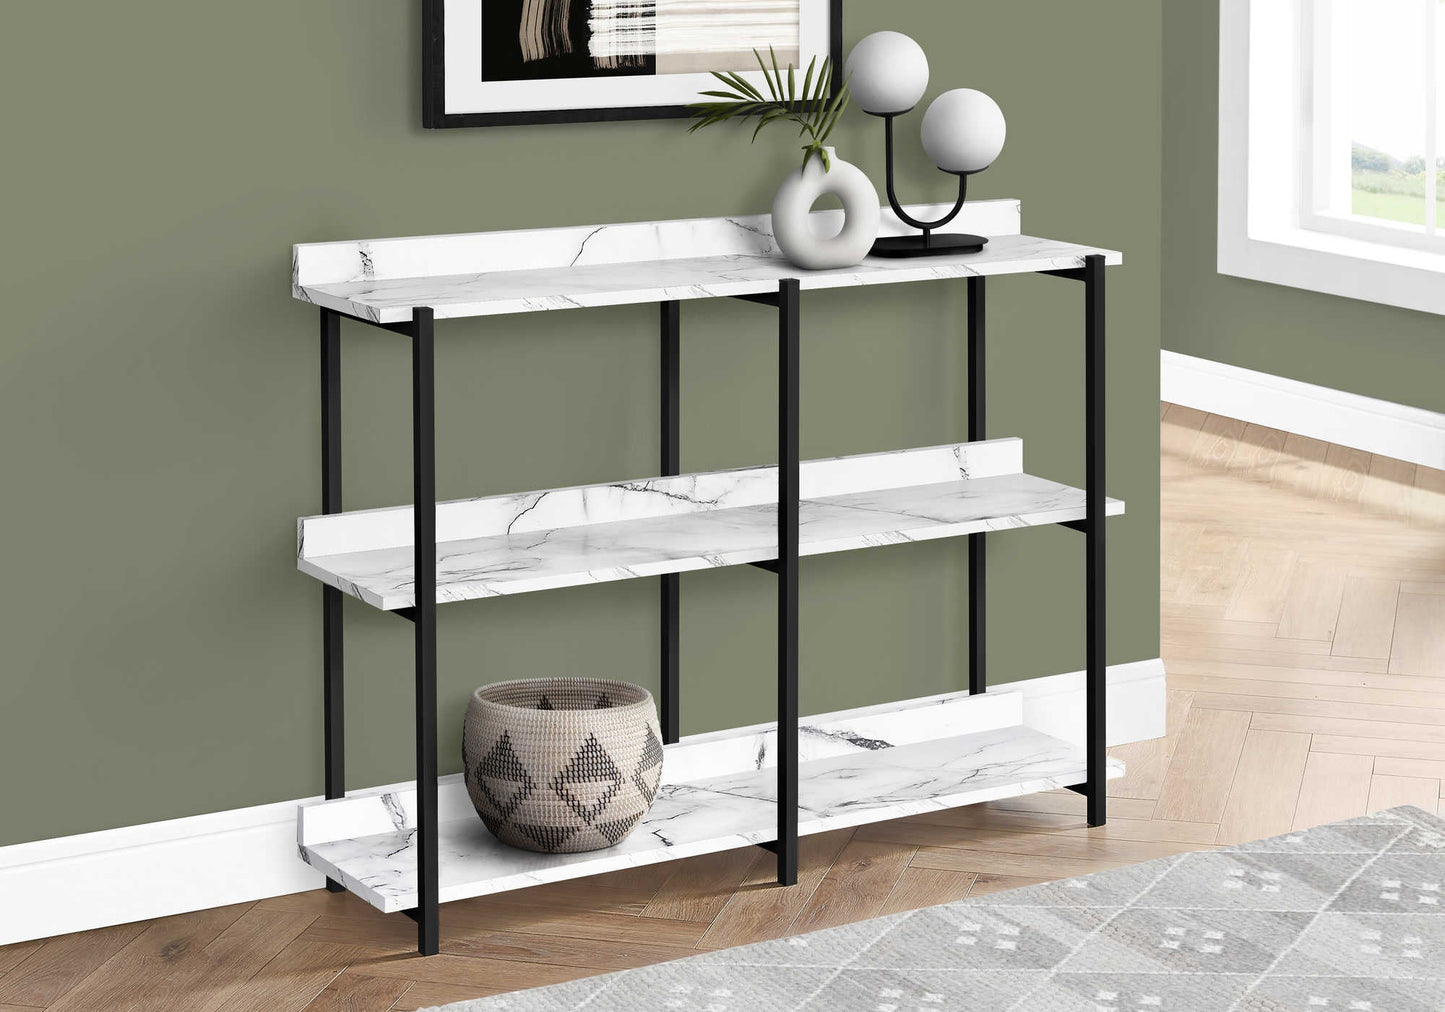 48"L Metal Frame Laminate Tabletop Bedroom Accent Console Table